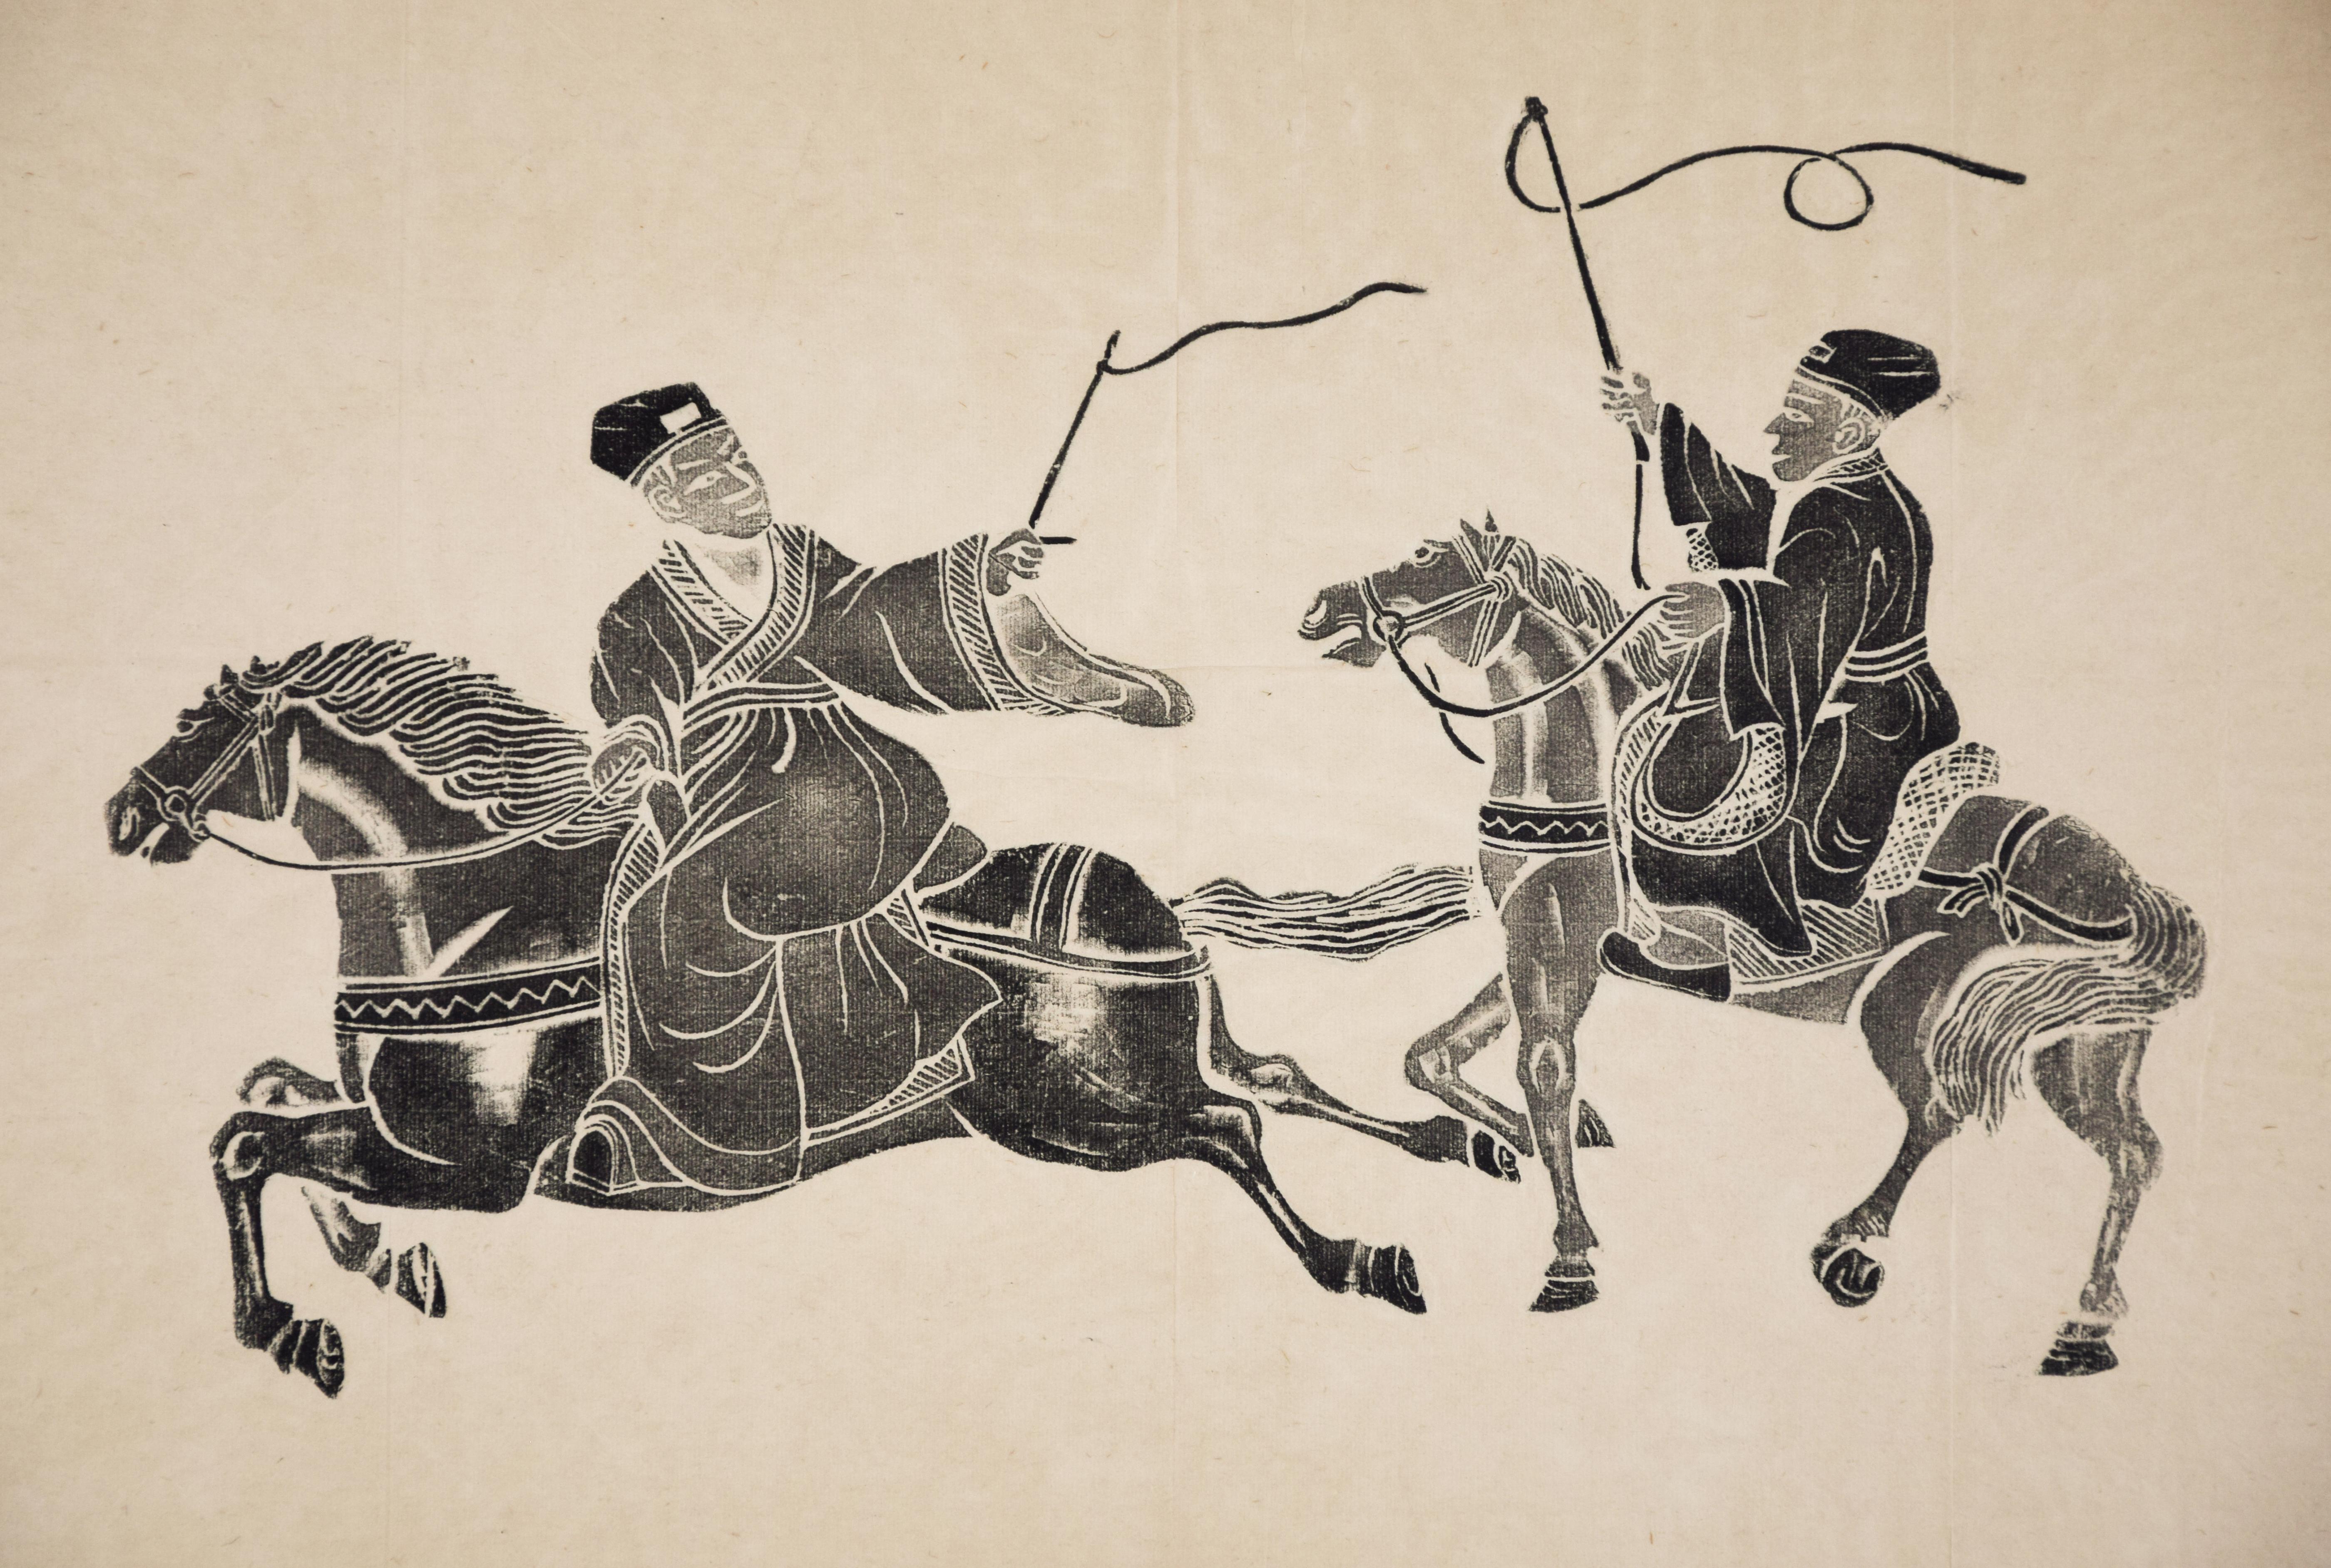 Riders - Woodcut Early 20th Century - Print by Unknown